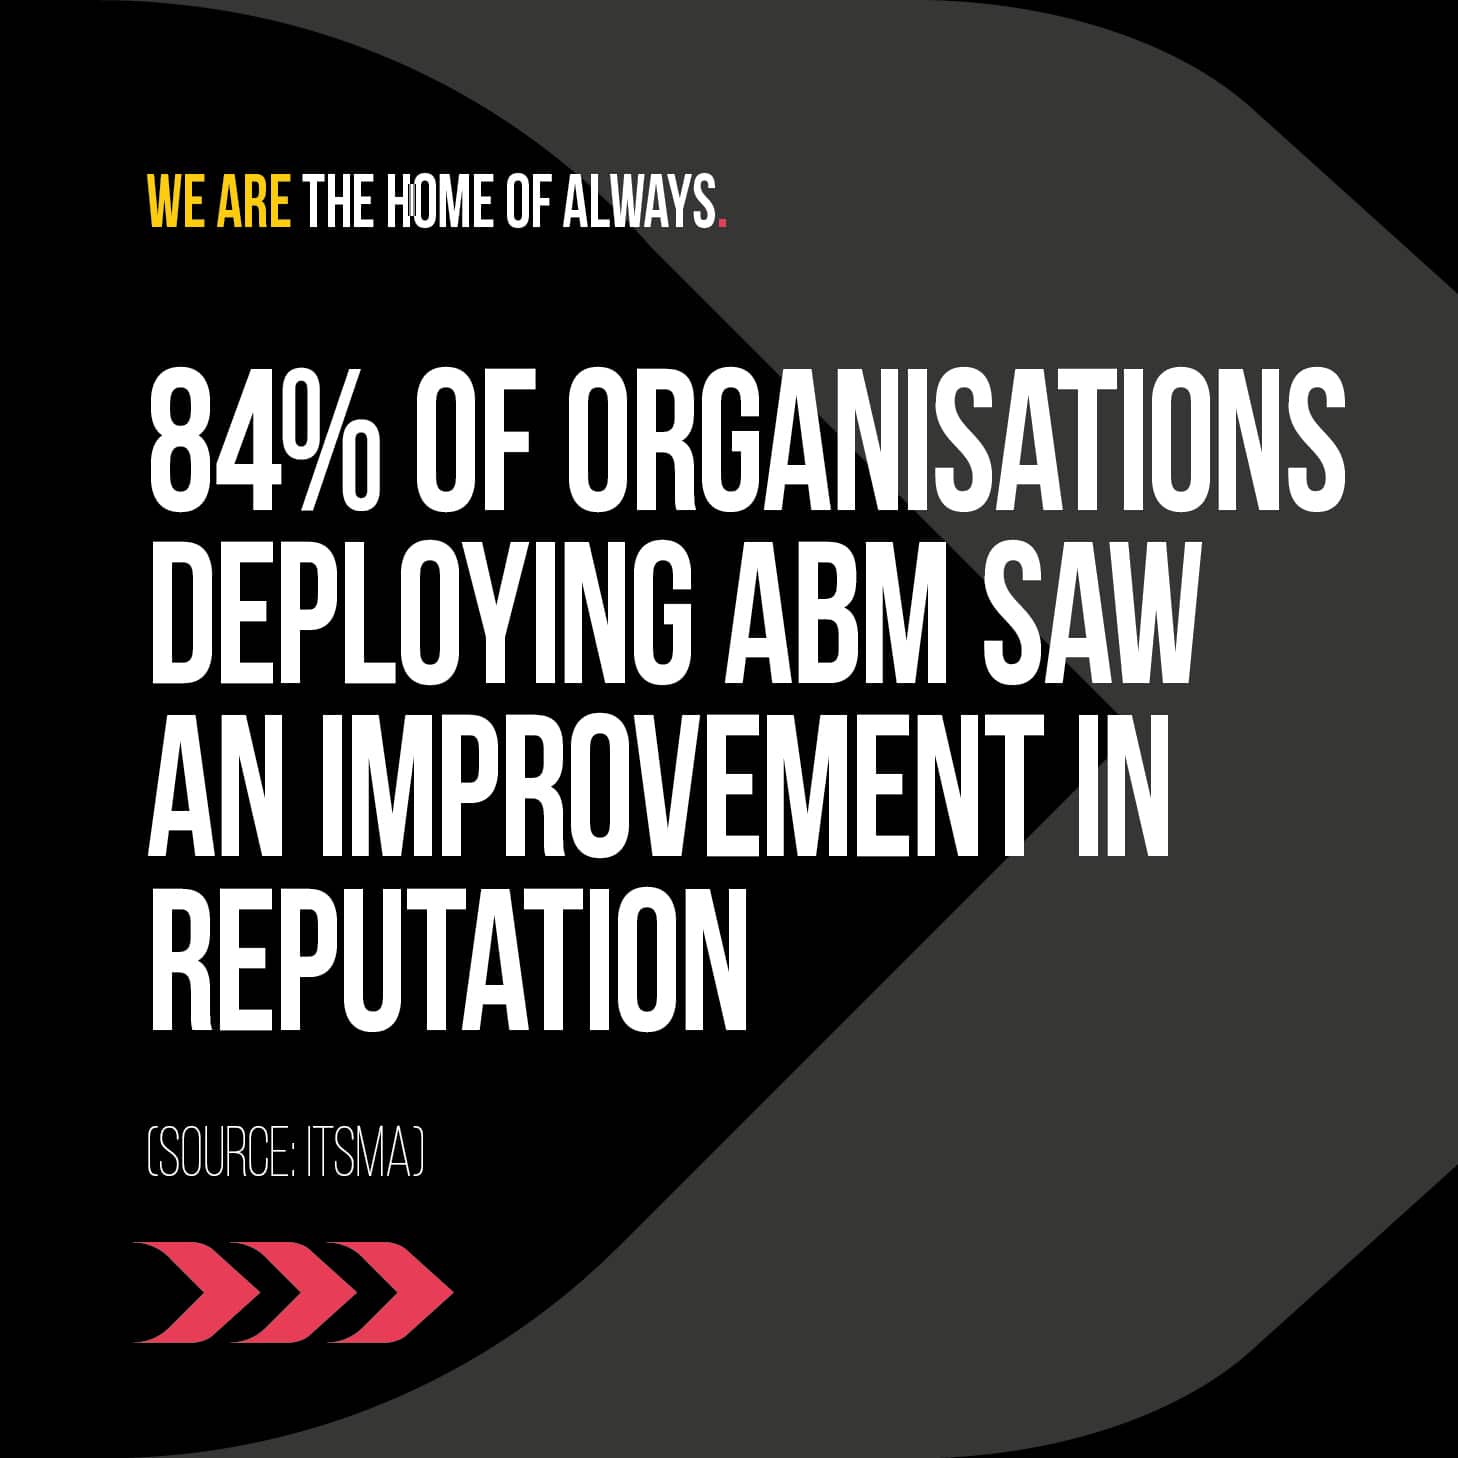 84% of Organisations deploying ABM saw an improvement in reputation.